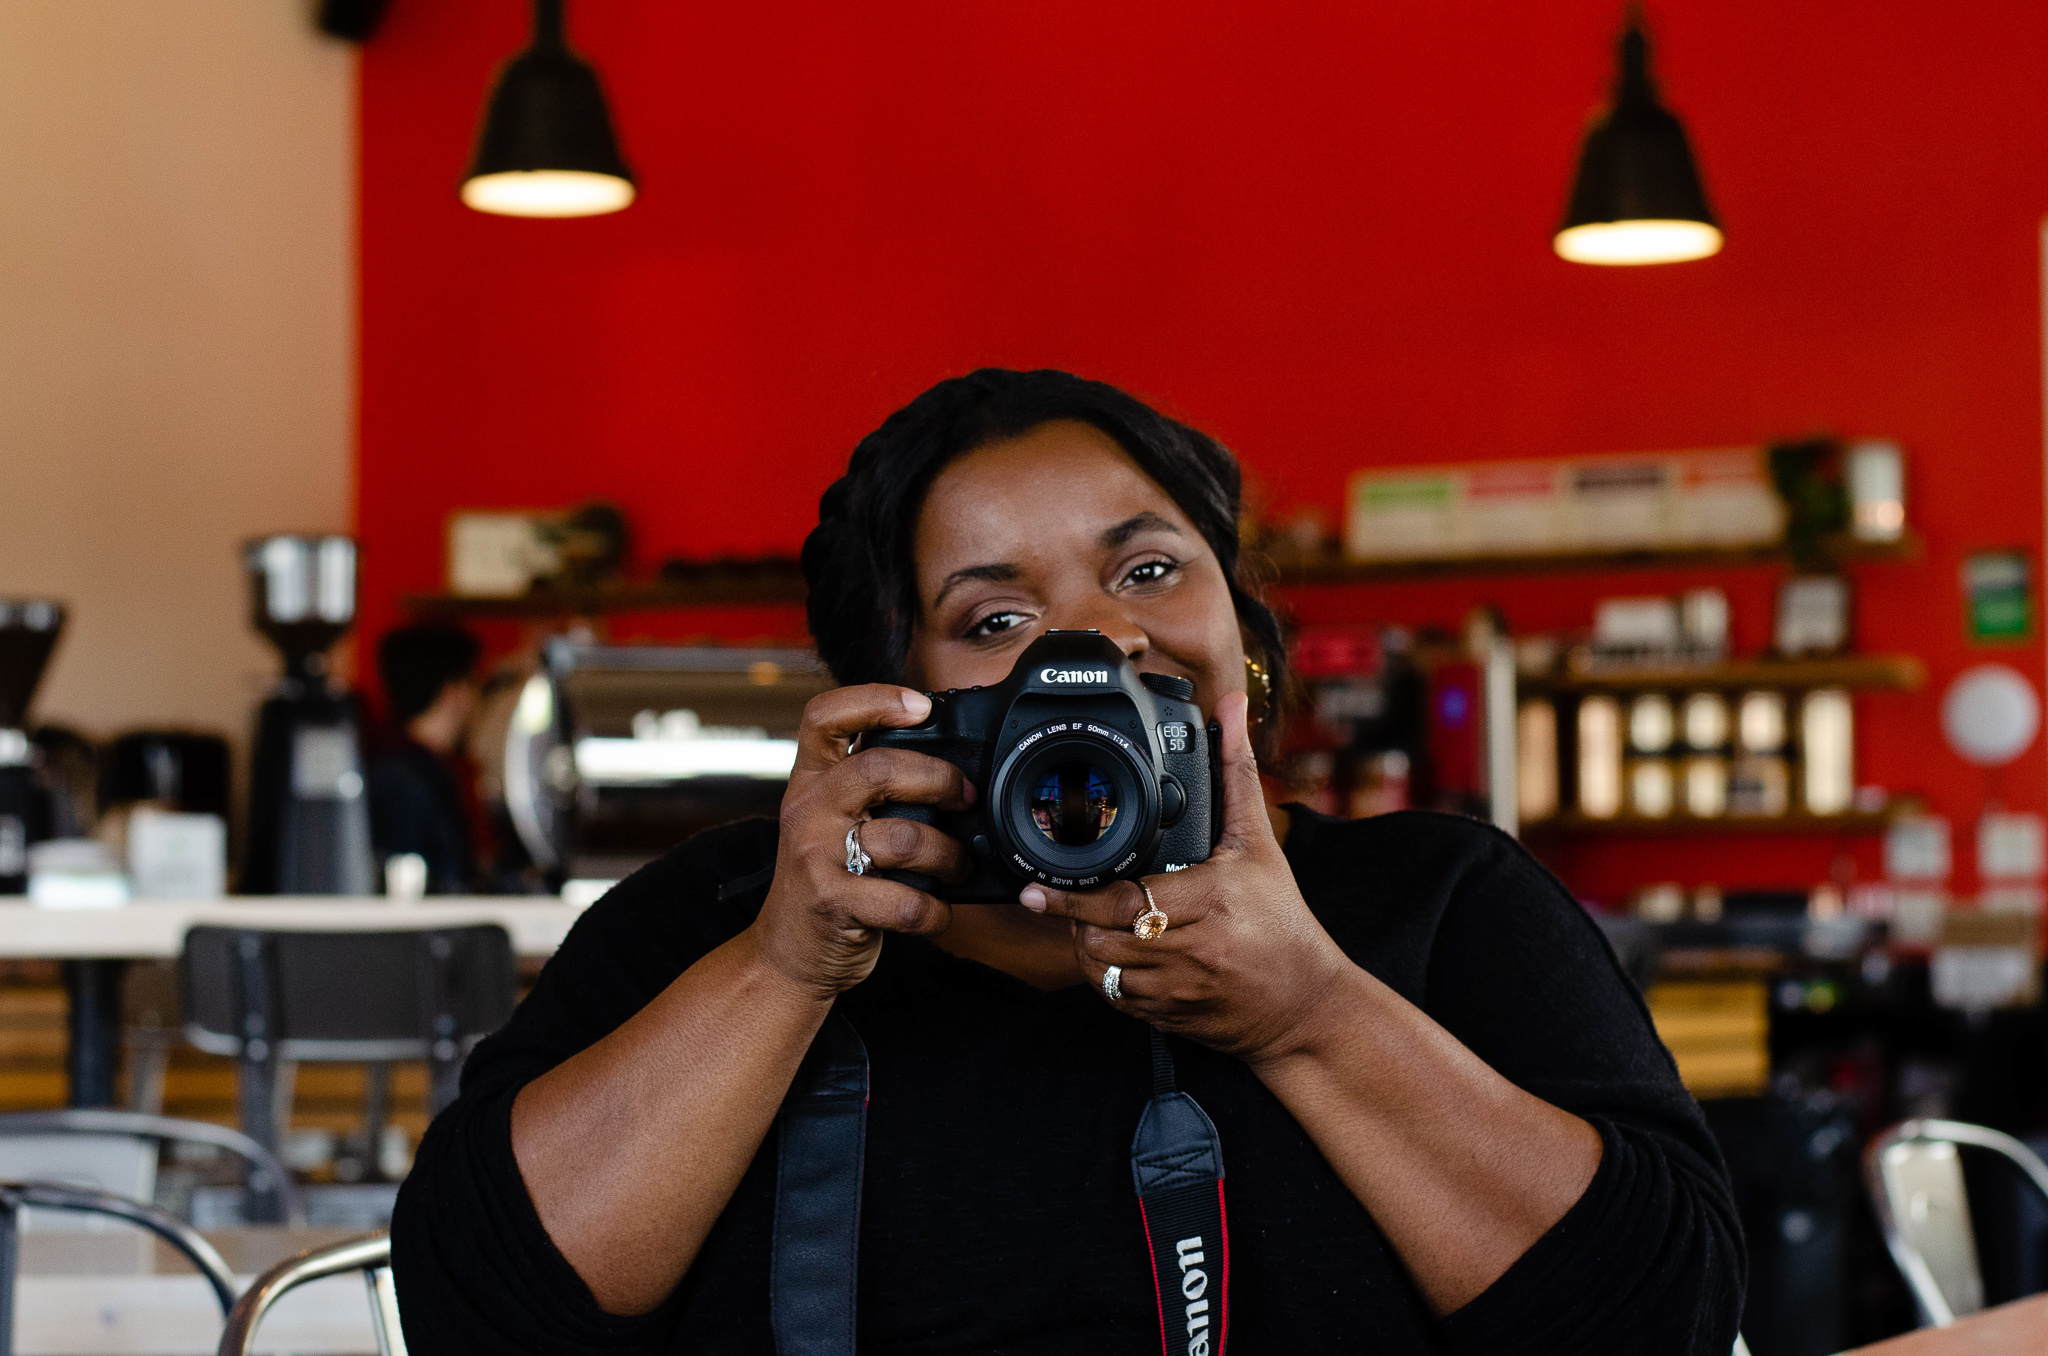 African American Female wearing aa black shirt holding a Canon camera in front of a red background at a coffee shop